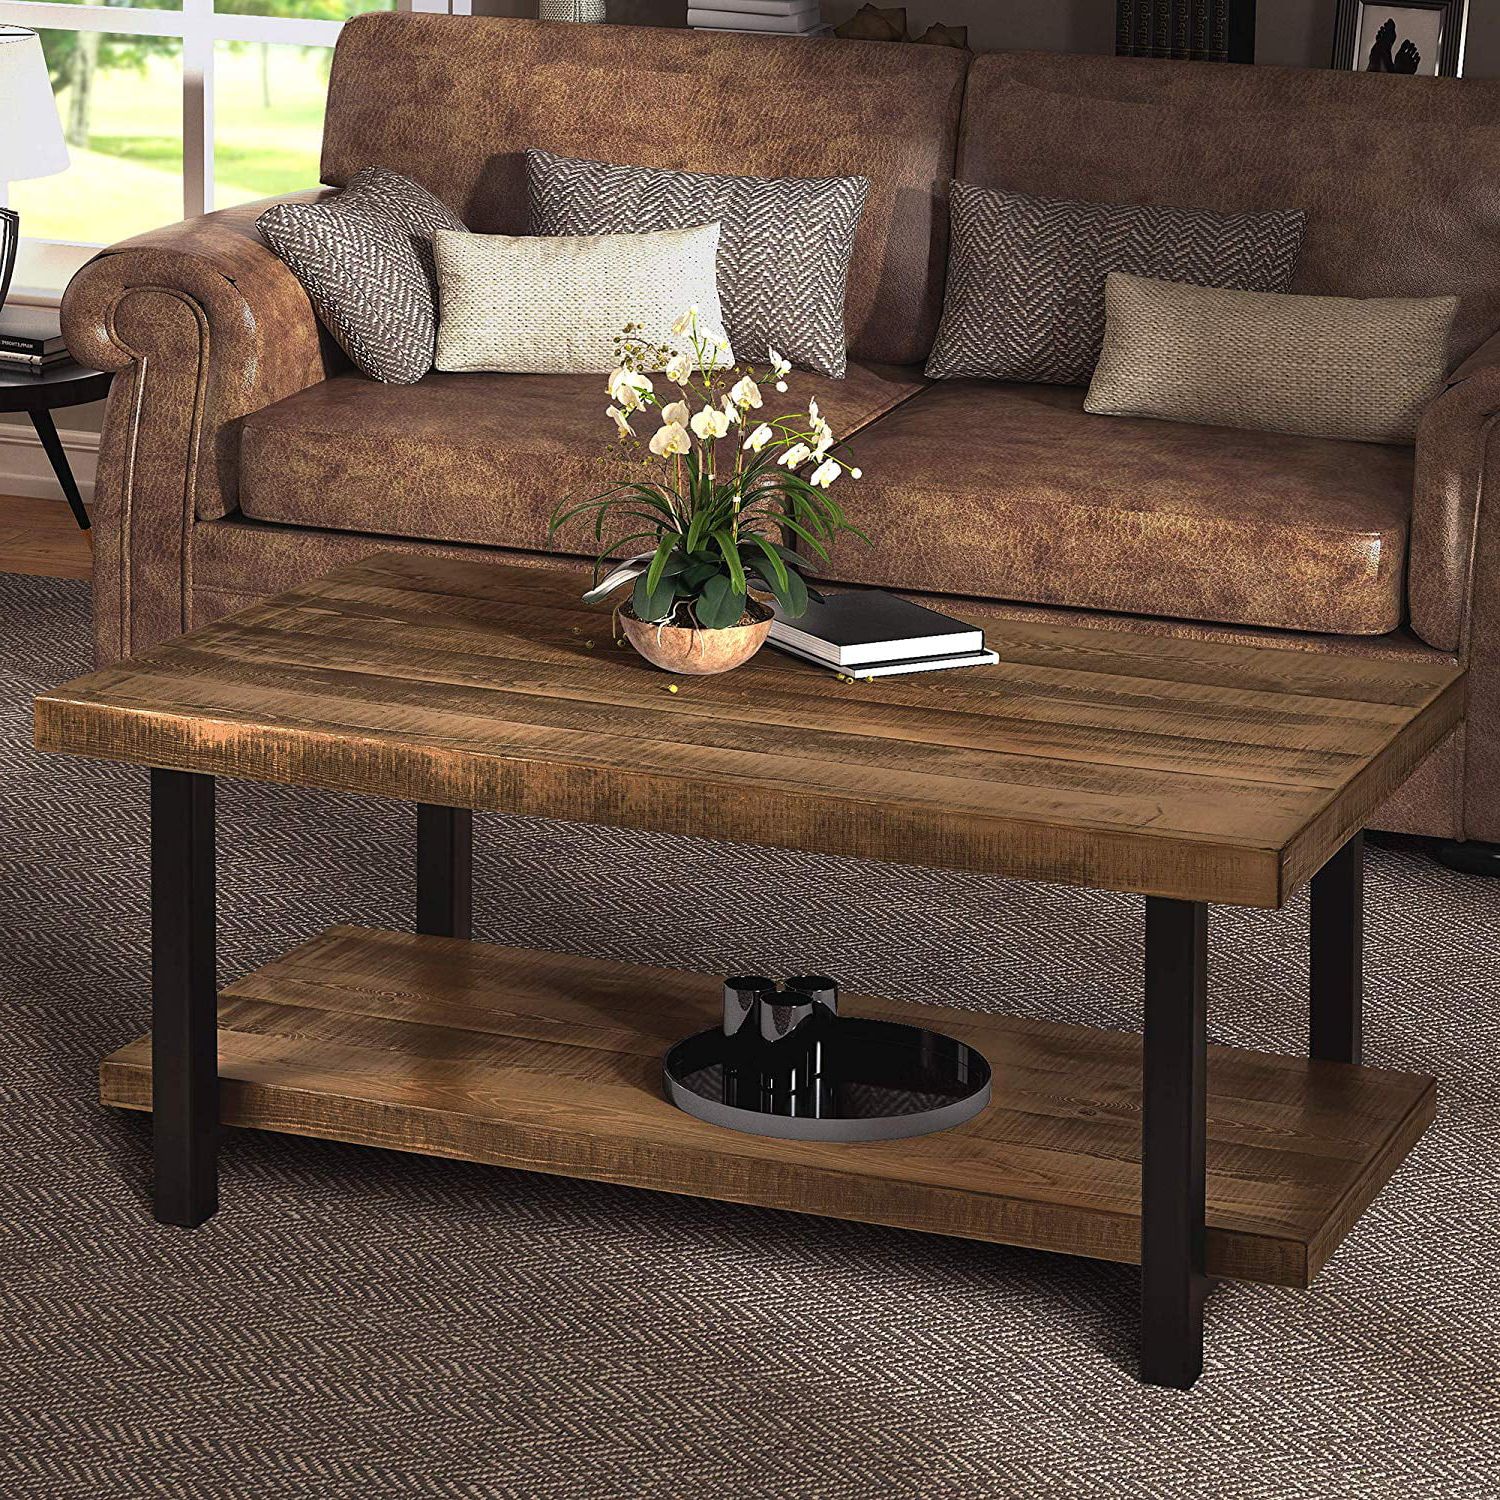 2020 Rustic Wood Coffee Tables For Harper&bright Designs Industrial Rectangular Pine Wood Coffee Table (View 4 of 15)